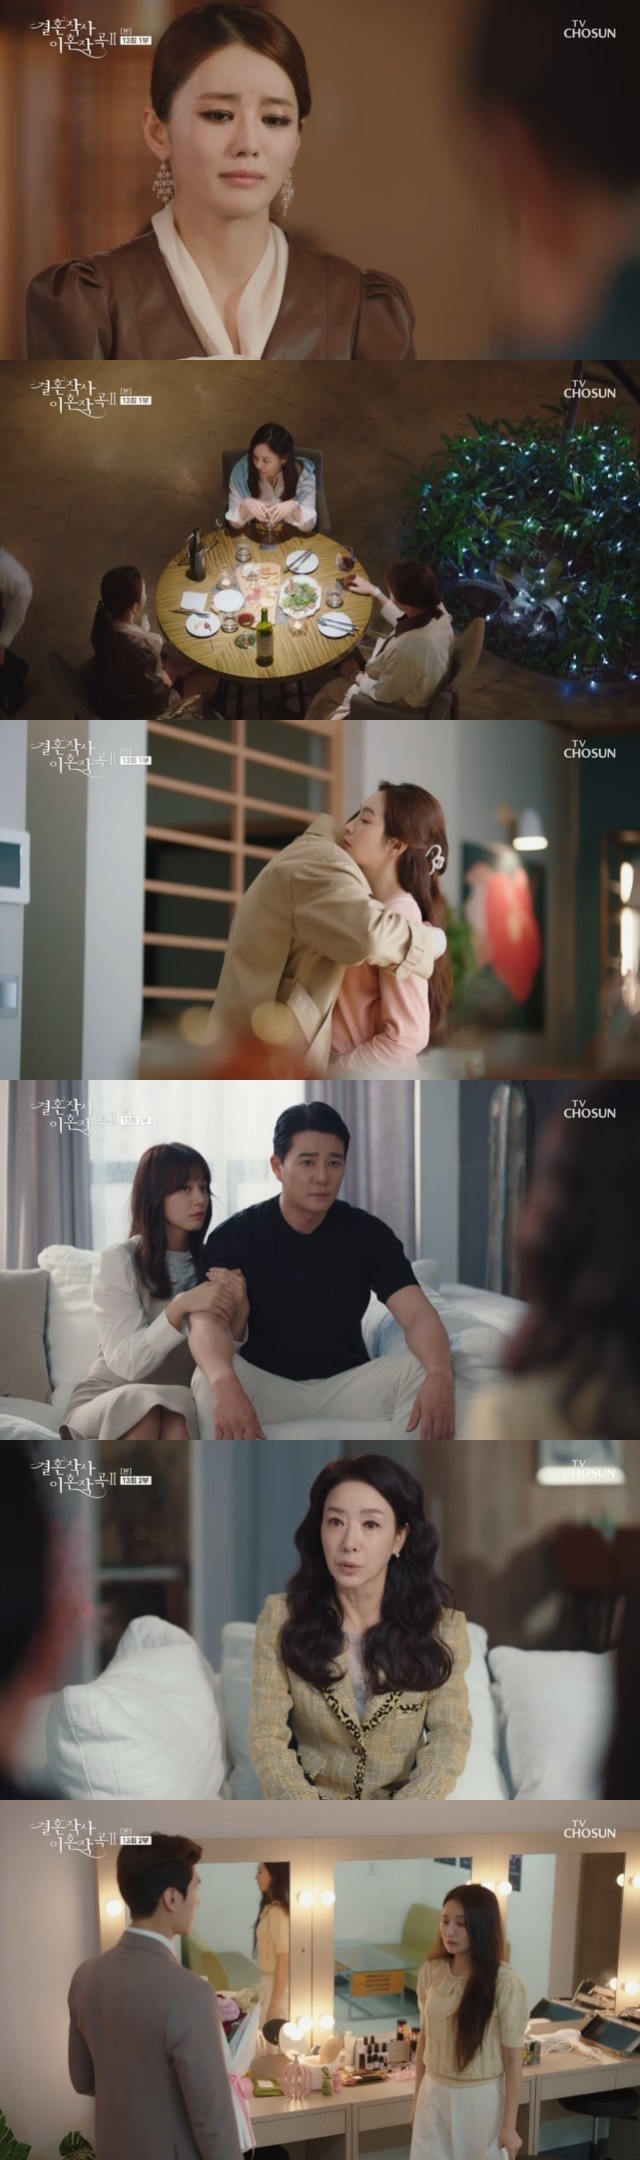 Song Ji-in entered Lee Tae-gons house with Lee Ga-ryung and Sung Hoon finally making a divorce decision.In the 13th episode of TV Chosuns Saturday Drama Marriage Writing Divorce Composition 2 (playplayplayed by Phoebe (Im Seong-han) and directed by Yoo Jung-jun, Lee Seung-hoon), which was broadcast on July 24, Sapi-young (played by Park Joo-mi) and Bo Hye-ryong (played by Lee Ga-ryung) who finish their marriage one by one were drawn.On the day, Bu Hye-ryong suddenly asked her parents-in-law Panmunho (Kim Eung-soo) and So Ye-jeong (Lee Jong-nam) to go to Daejeons house during a date with Judge Hyun (Sung Hoon).After that, he was shocked to declare that he would divorce to the judge.For the sake of justice, he said, referring to the reason for his decision to divide. He said that he felt sorry for seeing the judge who looked at the pregnant woman in the movie theater and turned his eyes without knowing it.I do not think I should have a father when I am born, said Buhye. I should prepare the documents tomorrow before I change my mind.I want you to feel like I am willing to give my hand to this person or my mothers father, and I want you to feel like you are a diverce woman to know all of Korea.I am more proud than anyone, but I am married when I go out well. Panmunho said he would transfer the name of the house he lives in, but he demanded Cheongdam Villa, saying, I am not confident that I will live in the house alone.Judge Hyun was embarrassed, saying, Is not it where the chaebol live there? But Panmunho, who was excited to use Song Won (Lee Min-young) as his daughter-in-law, agreed, I know.He also demanded housing taxes and maintenance costs.After that, he went out to the call of Safi Young and had a drinking meeting with Ishieun Safi Young. At this meeting, Safi Young confessed to Buhye Young that he was a period of divorce meditation.I decided to give a divorce today, and I made a child outside, he said, all men are there.In the end, even Lee Si-eun shared a consensus with Bu Hye-ryong, revealing that Park Hae-ryun (played by Jeon No-min)s wind opponent is Nam Ga-bin (played by Lim Hye-young).Over time, the real reason for his decision to give a duty was revealed. She called her mother, who was living abroad, and told her that a duty article would soon be released.But Buhye-ryong said, Im wrong about the book, but I have a problem. My womb is deformed.I dont know my in-laws. Just because Im giving them a divorce for one reason or another. Dont worry about me. Mommy and daughter.On the other hand, the judge, who did not know this, immediately ran to Songwon and showed joy by informing him of the fact of the divorce.Amy (Song Ji-in) asked Safiyoung to contact him first to see him, and Amys business was to get permission to enter the house of Shin Yu-shin (Lee Tae-gon).The amazing Safiyoung replied, Marry, but Amy calls her a full-fledged sister and is mentally willing.Amy also shocked Safi Young by revealing that Kim Dong-mi (Kim Bo-yeon) is Shin Yu-shins First Love.Kim Dong-mi also revealed his black heart to Shin Yu-shin, who became alone. Kim Dong-mi told Safi-young, I will go in whatever Jia (Park Seo-kyung) father says.Even if you put a side dish on it, you do not eat it, your face is completely half.Since then, Kim Dong-mi has imagined to spend a lot of time with Shin Yu-shin, and he was surprised to see Amy, who had already packed her luggage.On the other hand, Safi Young, who guessed the bloody fight between the two, thought, Lets live in a house with old First Love and a young government. What do you do with root seeds?Kim Dong-mi deliberately stopped the housekeeper from coming to work to get Amy out, but Amy was also tough. Amy entered the room at once and surprised Kim Dong-mi.Kim Dong-mi told Amy to use Jias room, but Amy responded with a smile, saying, I am not a minor but I am going to marry my brother.Amy also spoke to Kim Dong-mi with a smile-filled face while she was living, and turned her inside out.For the first time, she gave a good breakup to the judge, and she asked her to call her when the baby was born and asked, Did I do well?I think I am okay with myself, he said in a smile of the judge. He acknowledged that he provided some cause to the divorce.